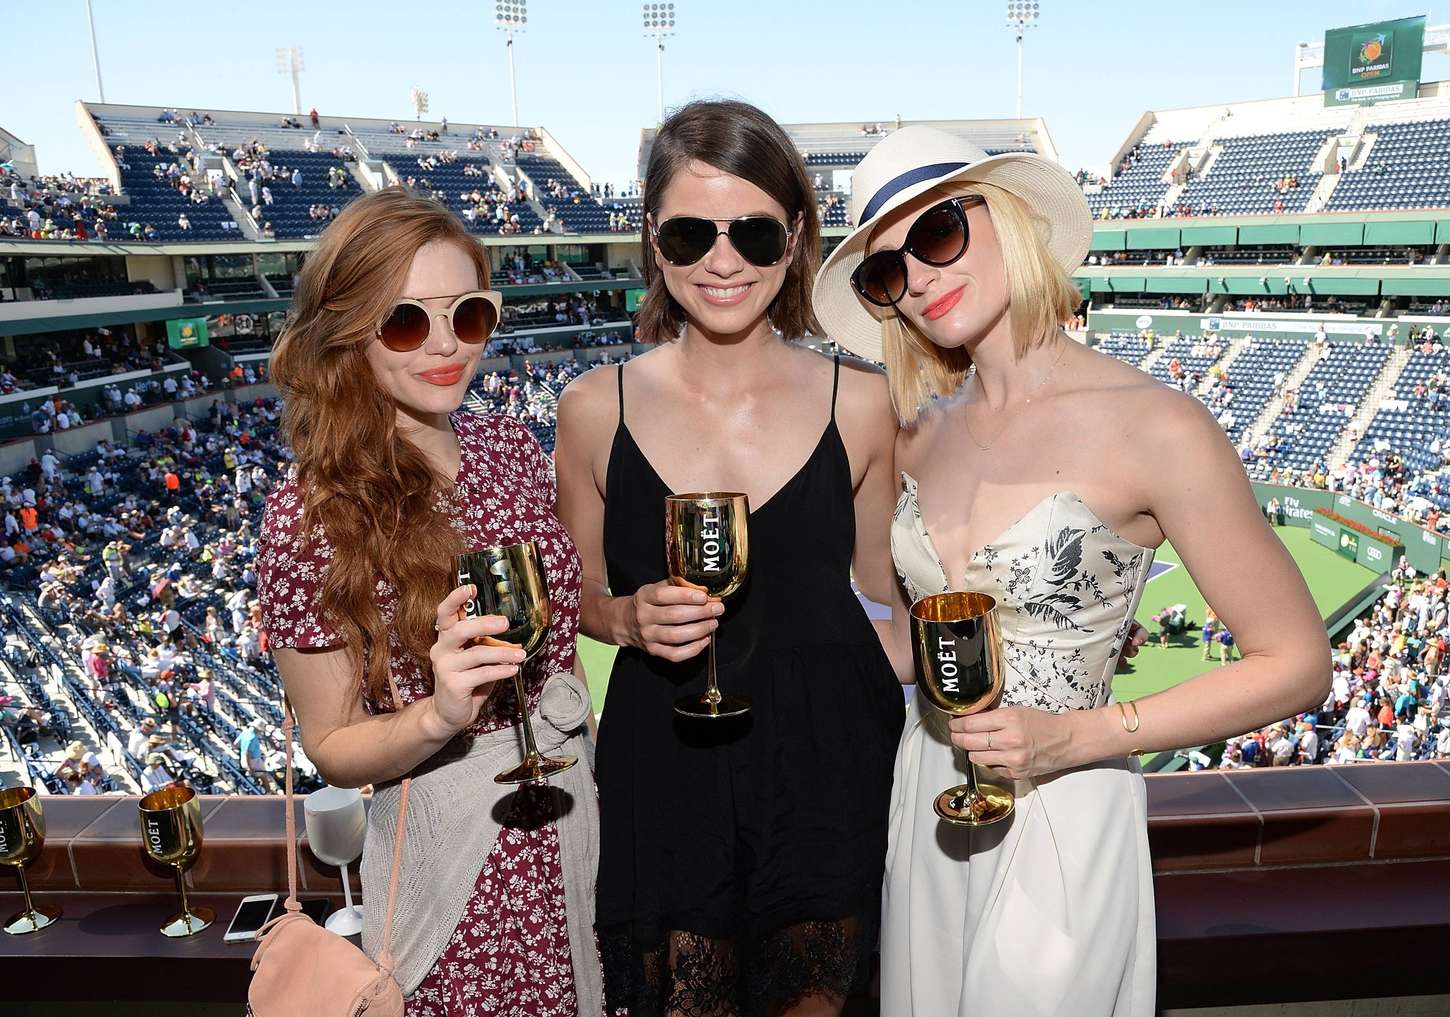 Holland-Roden_-The-Moet-and-Chandon-Suite-at-2015-BNP-Paribas-Open--02.jpg